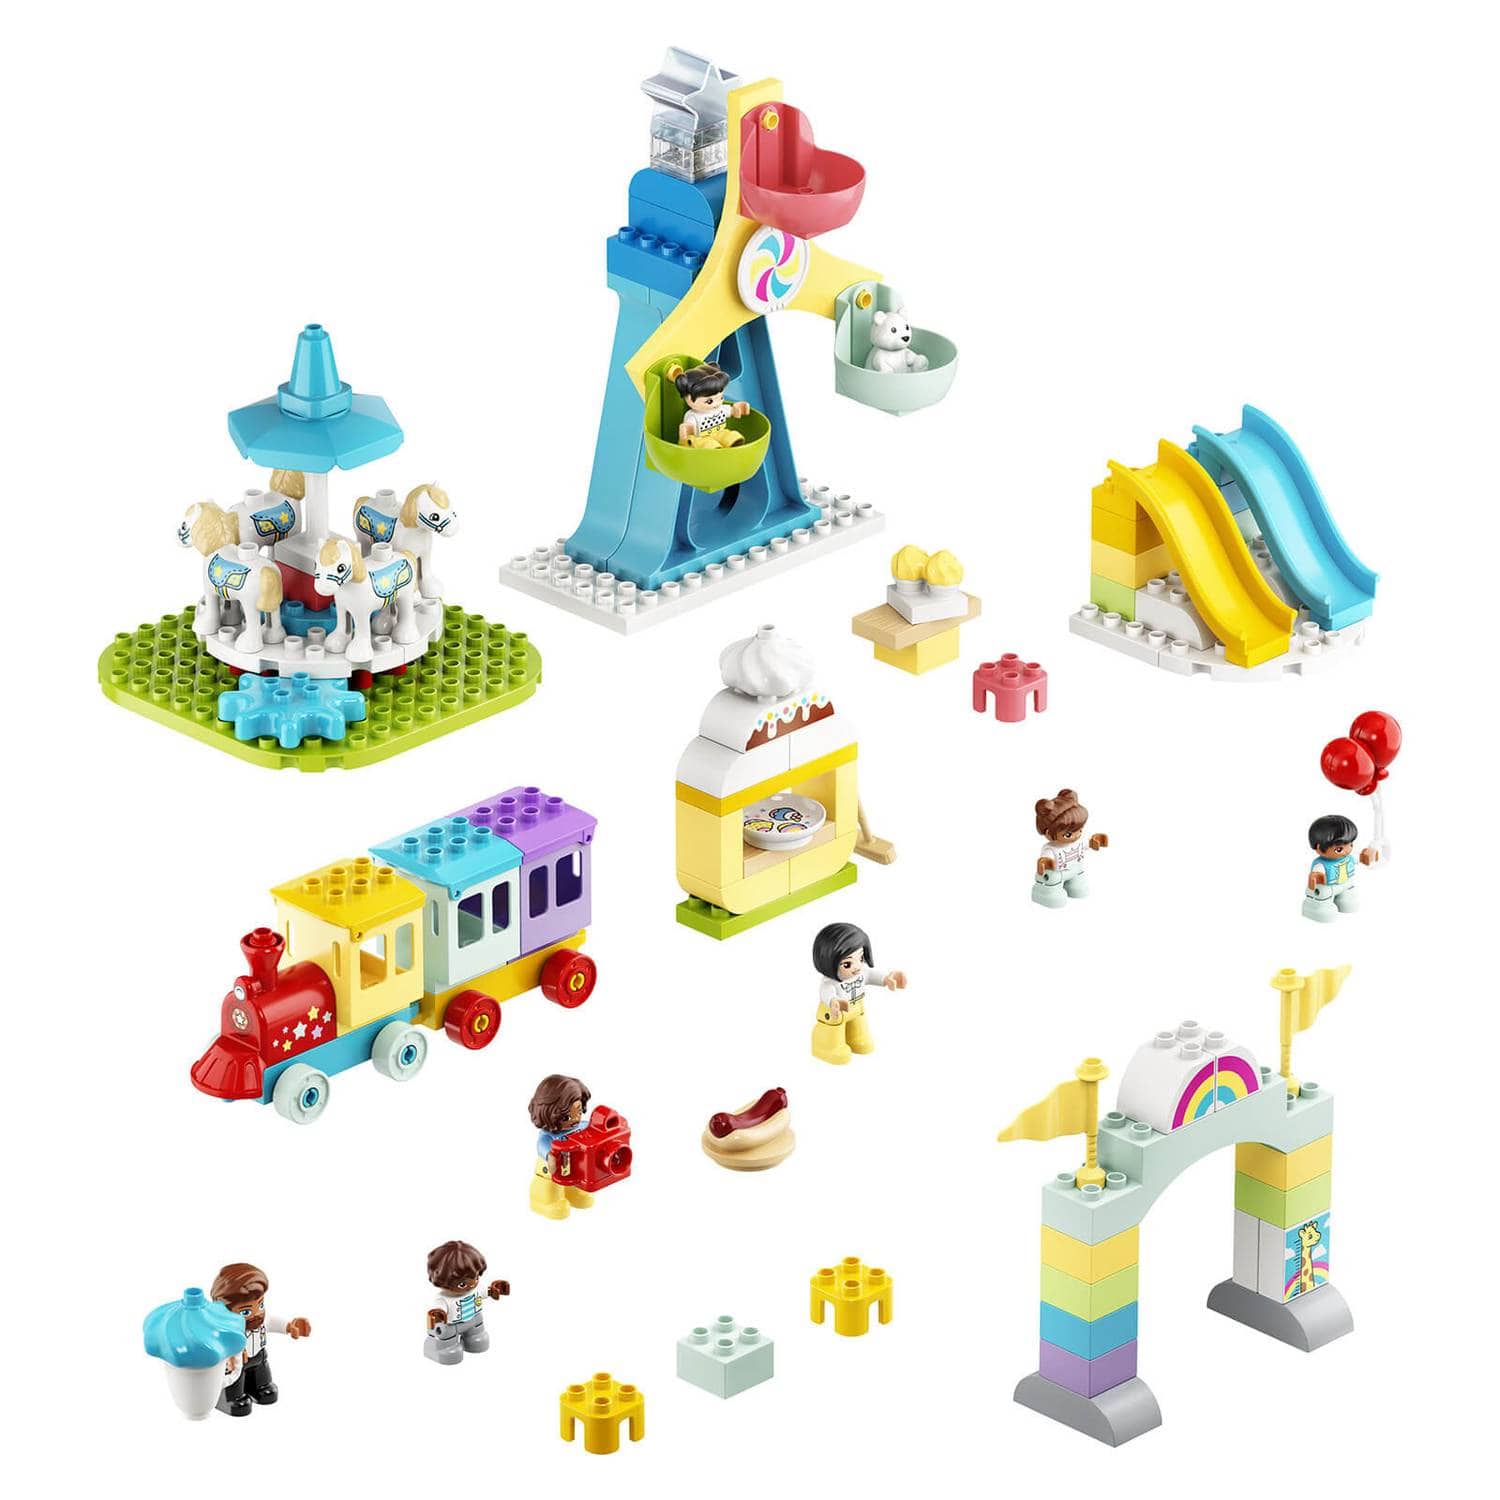 LEGO DUPLO Town: Amusement Park Toy for Toddlers (10956)